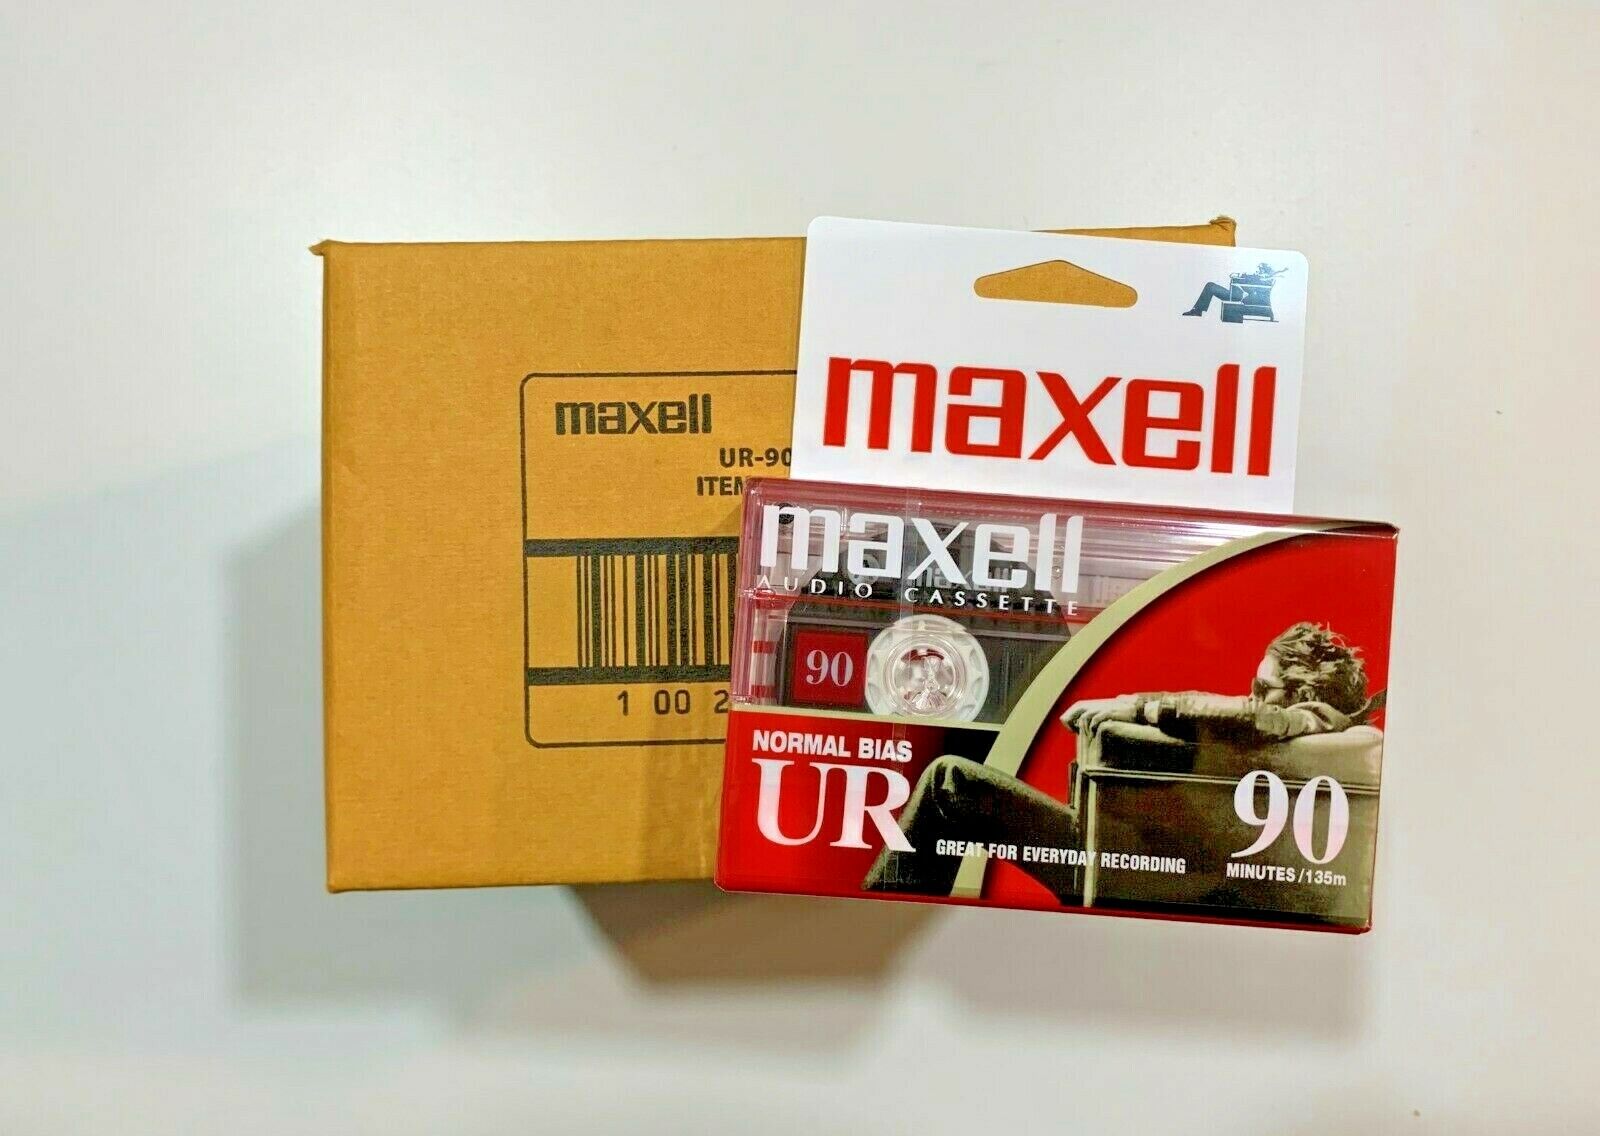 Maxell UR-90 Blank Audio Cassette Tapes (6 Pack) 90 Min Normal Bias - Recording